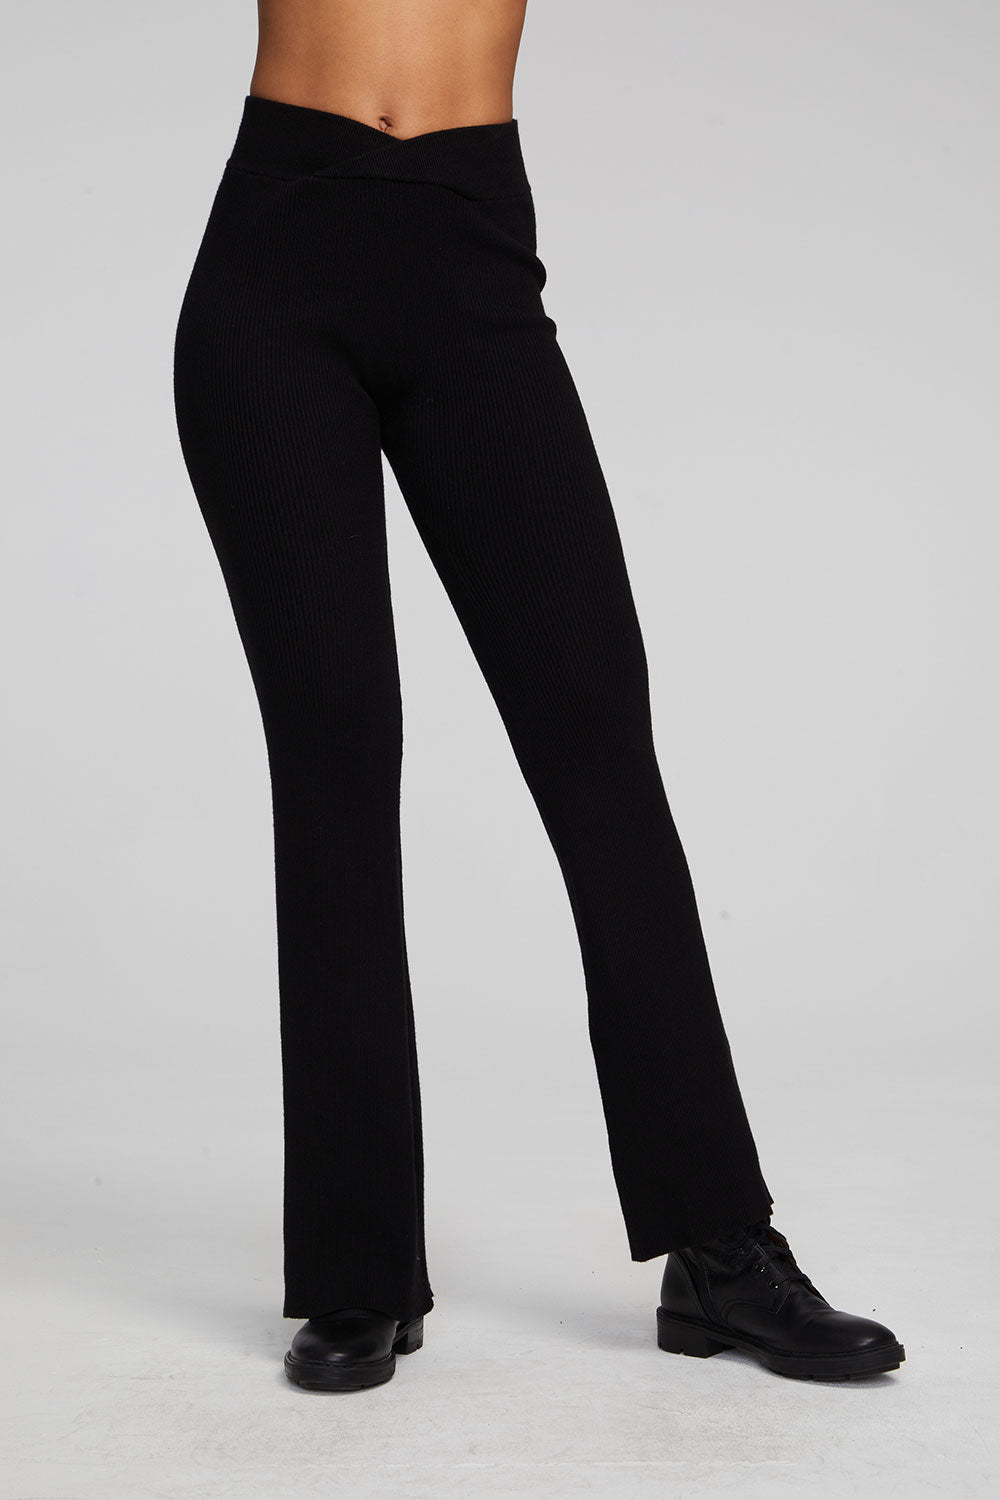 Party Shadow Black Flare Bottoms WOMENS chaserbrand